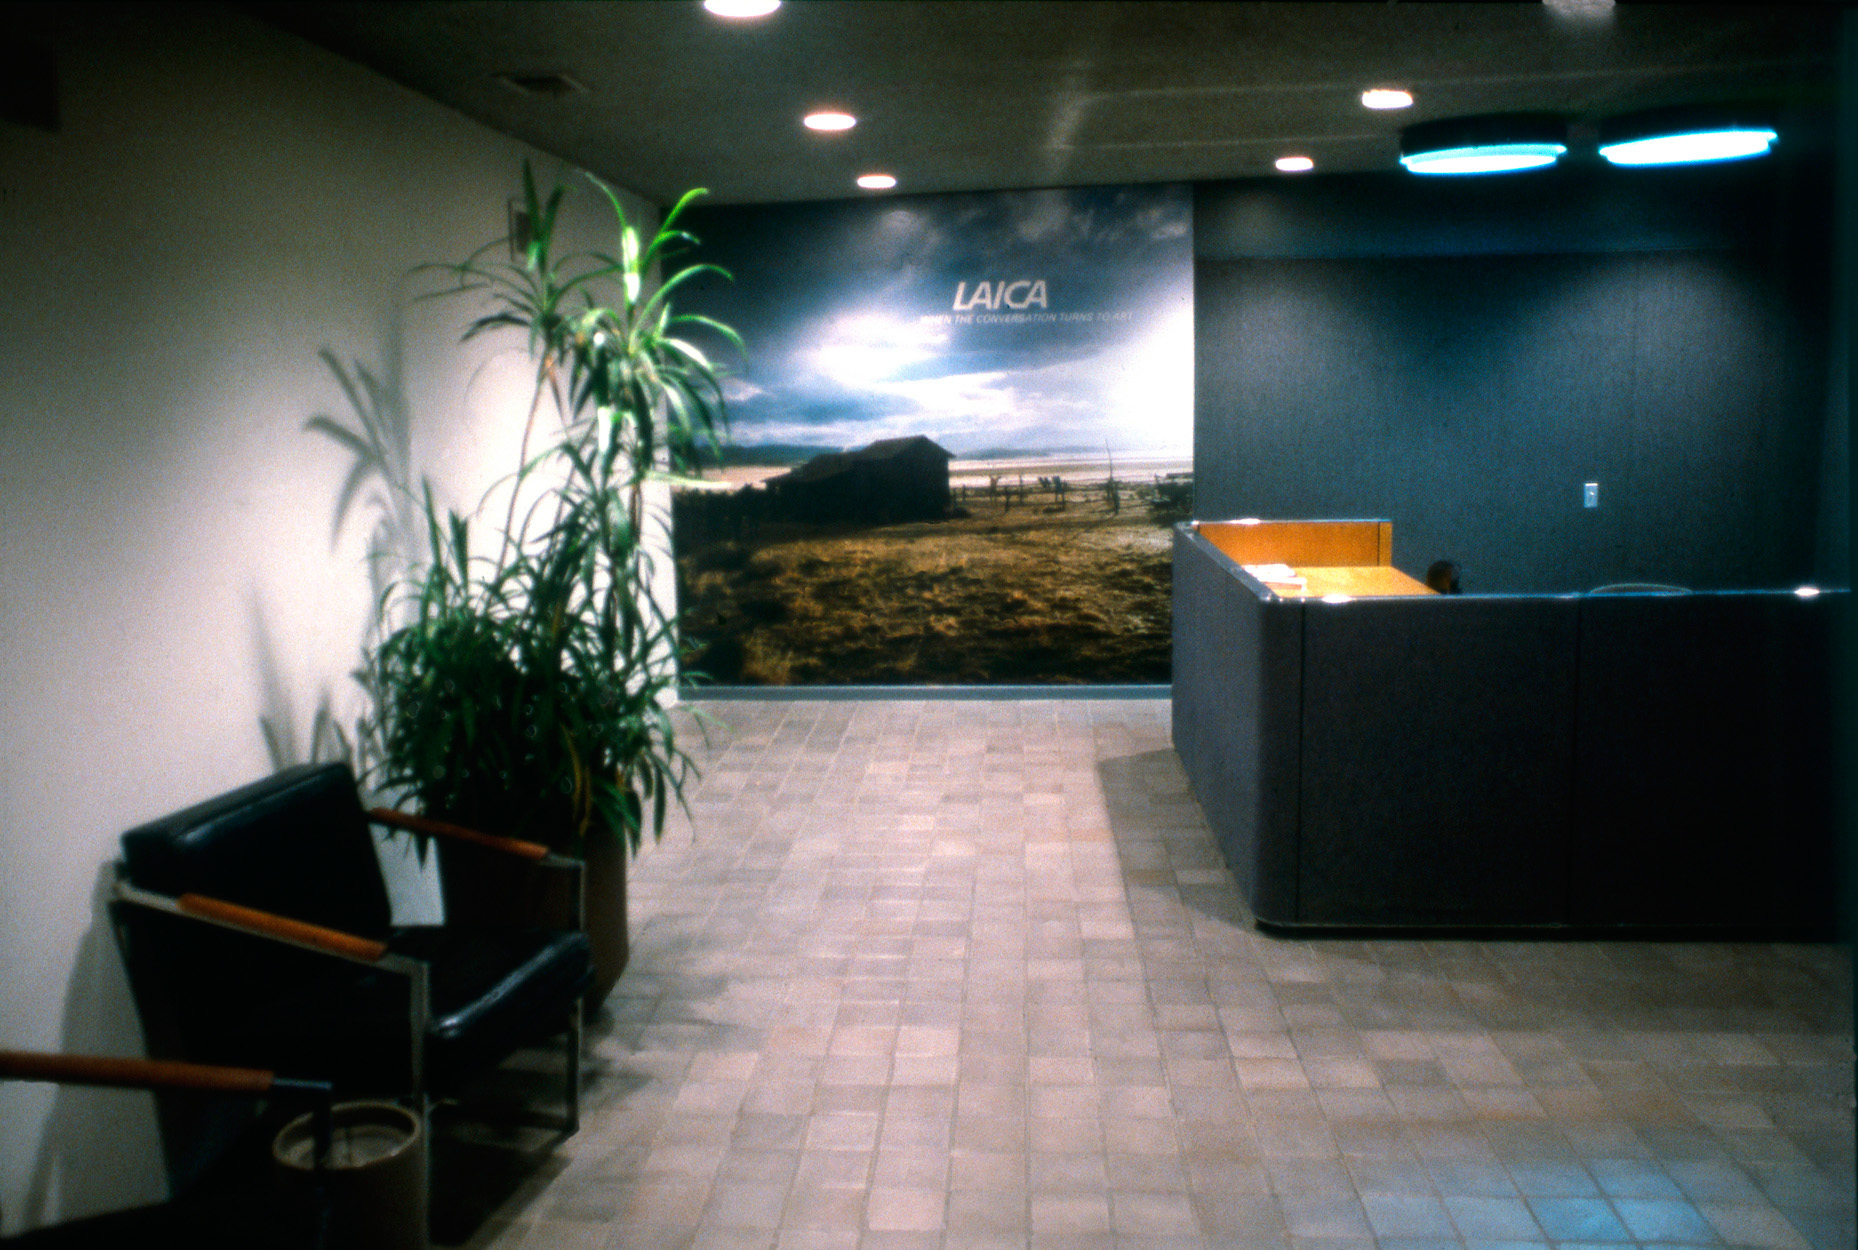 John Knight, <em>LAICA: When the Conversation Turns to Art</em>, a work in situ at LAICA Gallery, 1984. Installation view. Courtesy of the artist.